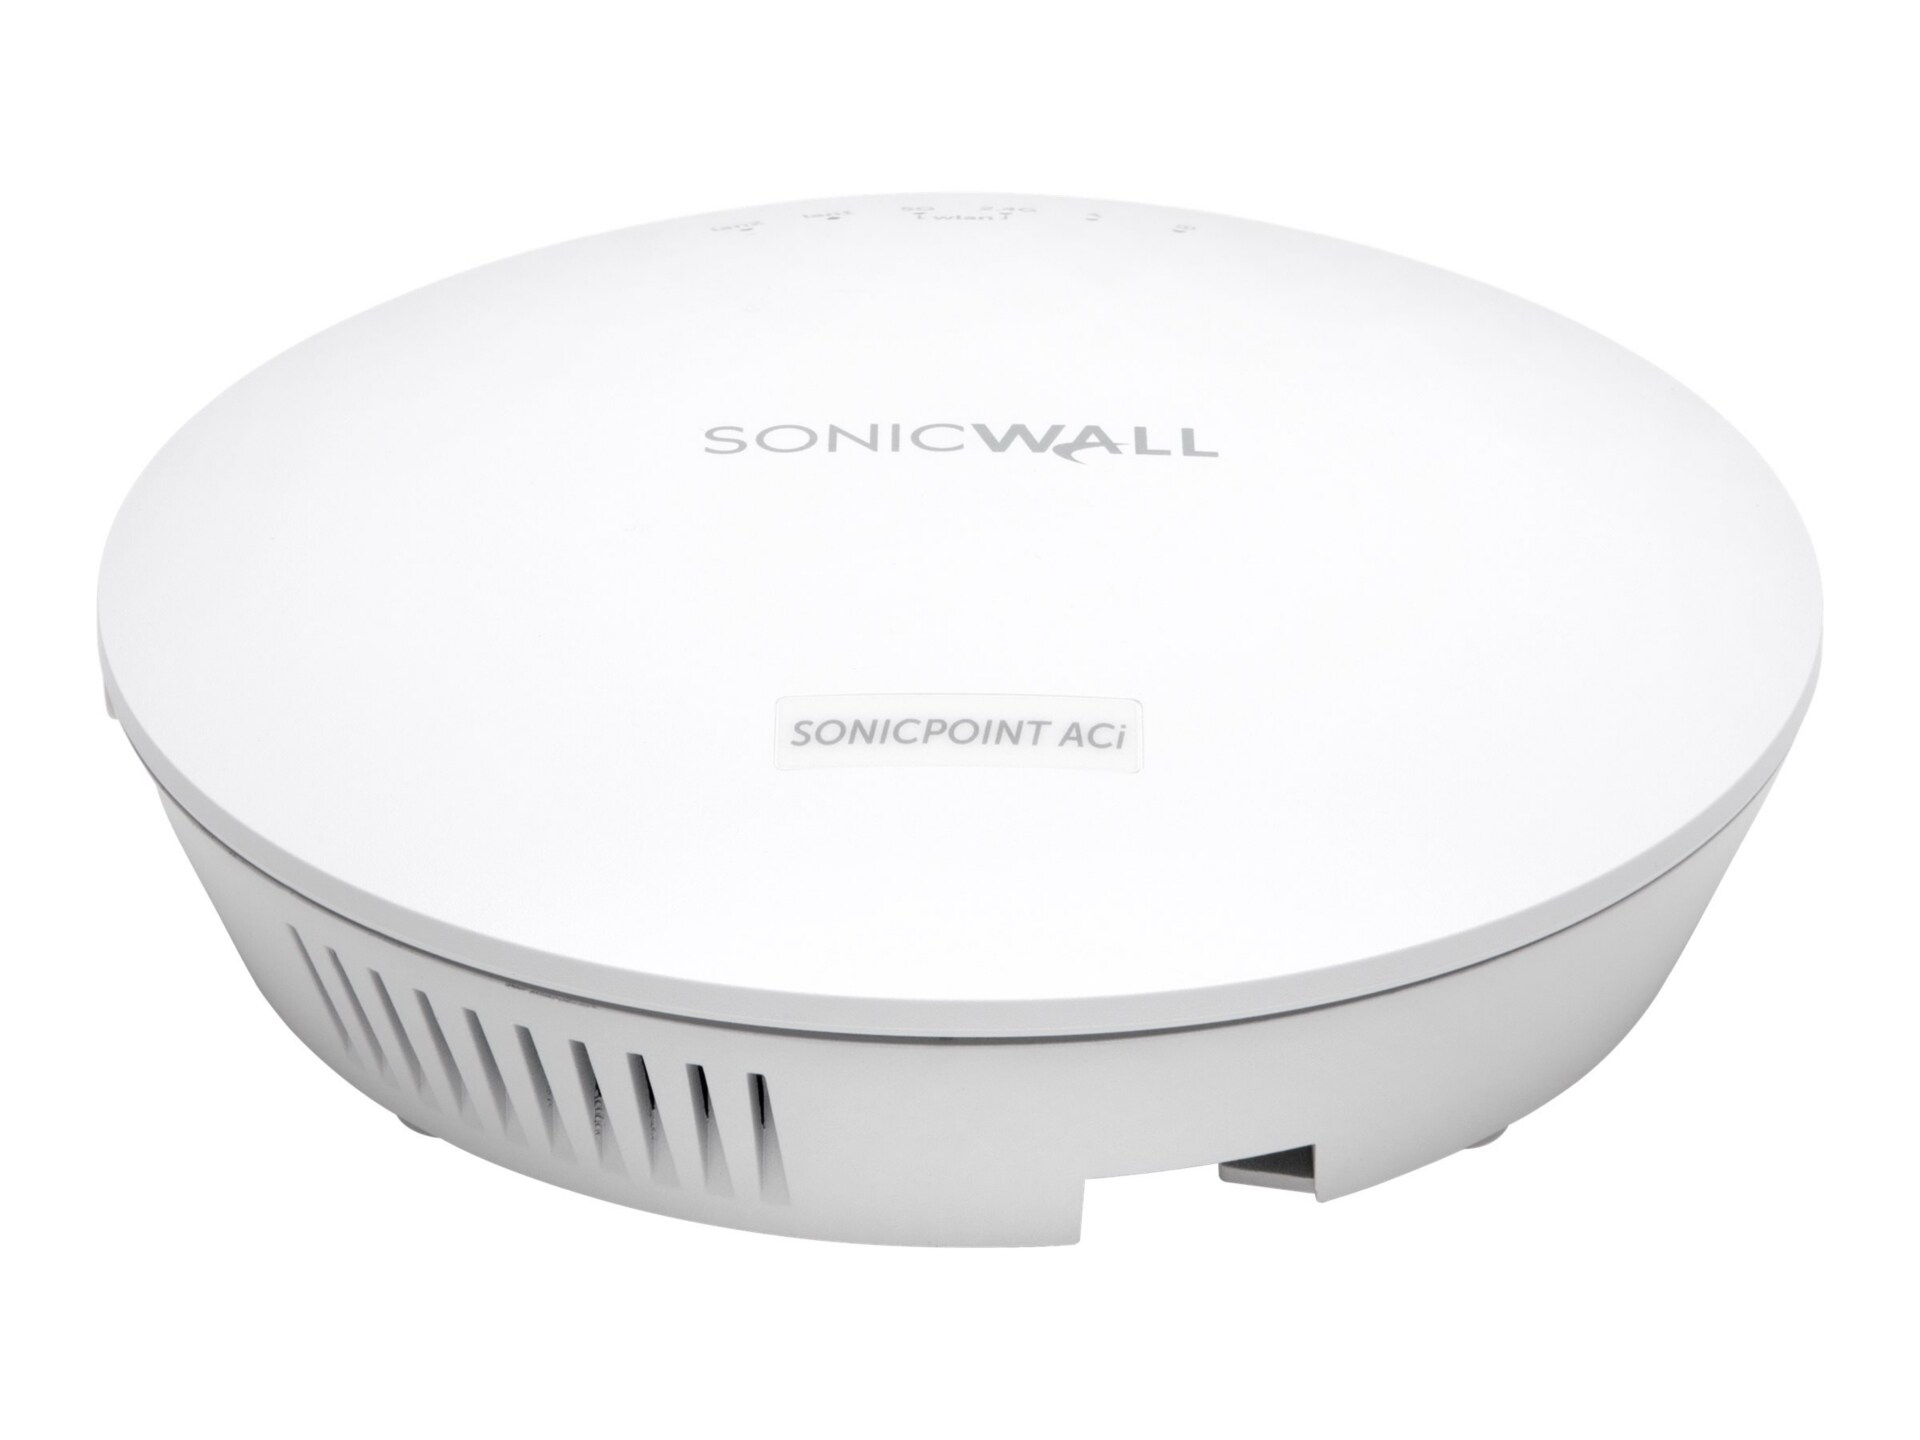 SonicWall SonicPoint ACi - wireless access point - with 3 years Dynamic Support 24X7